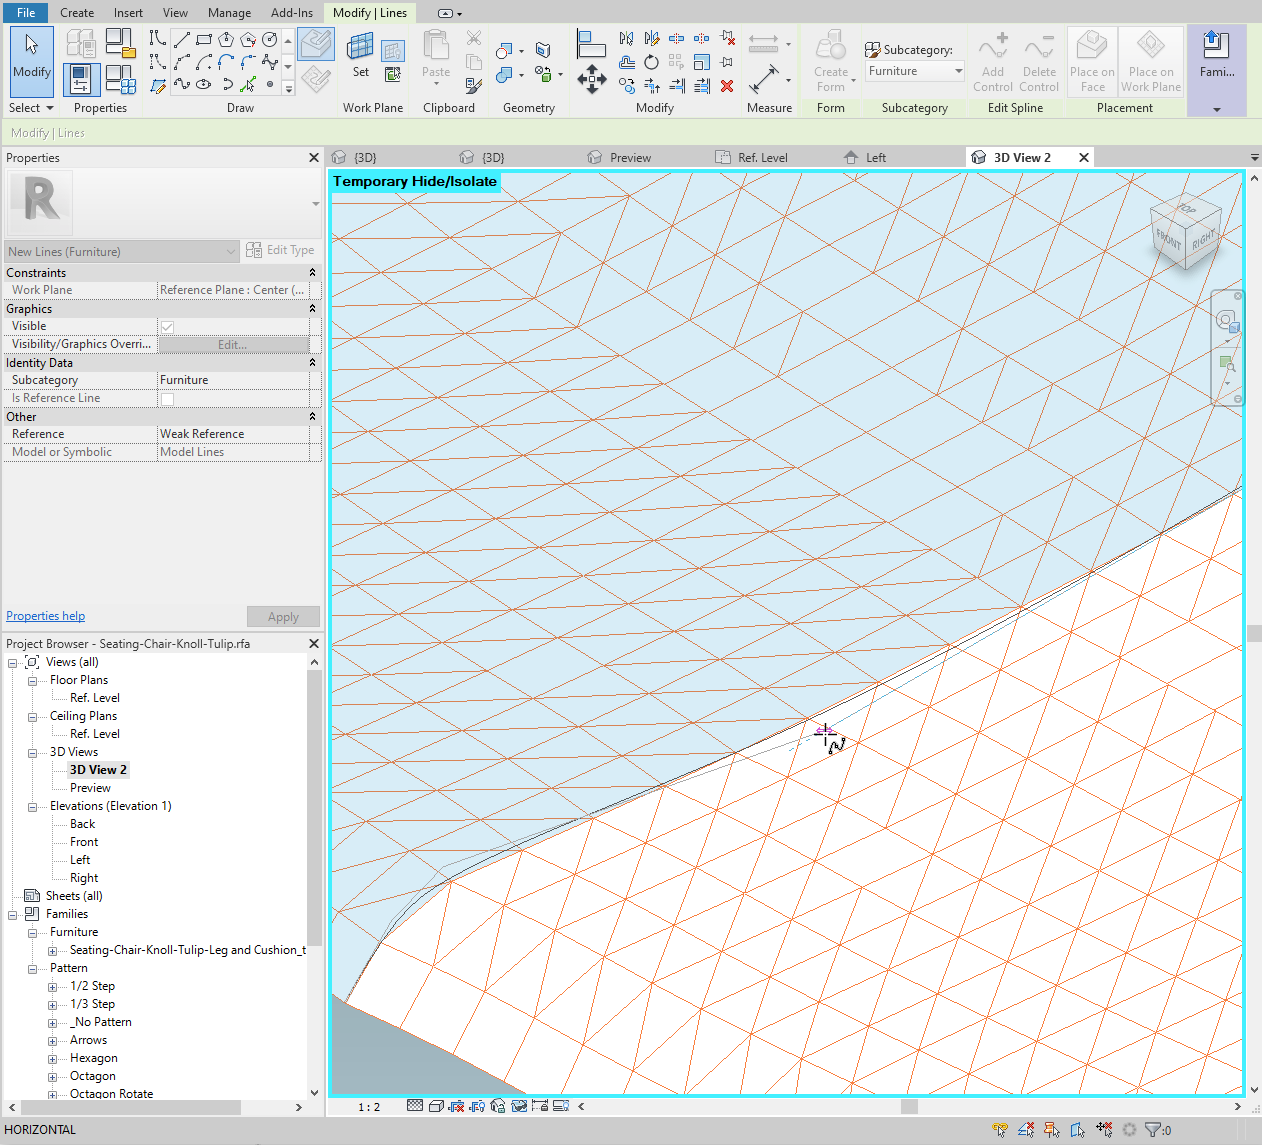 Adjust the spline using the control vertices to follow the intersection as closely as possible.